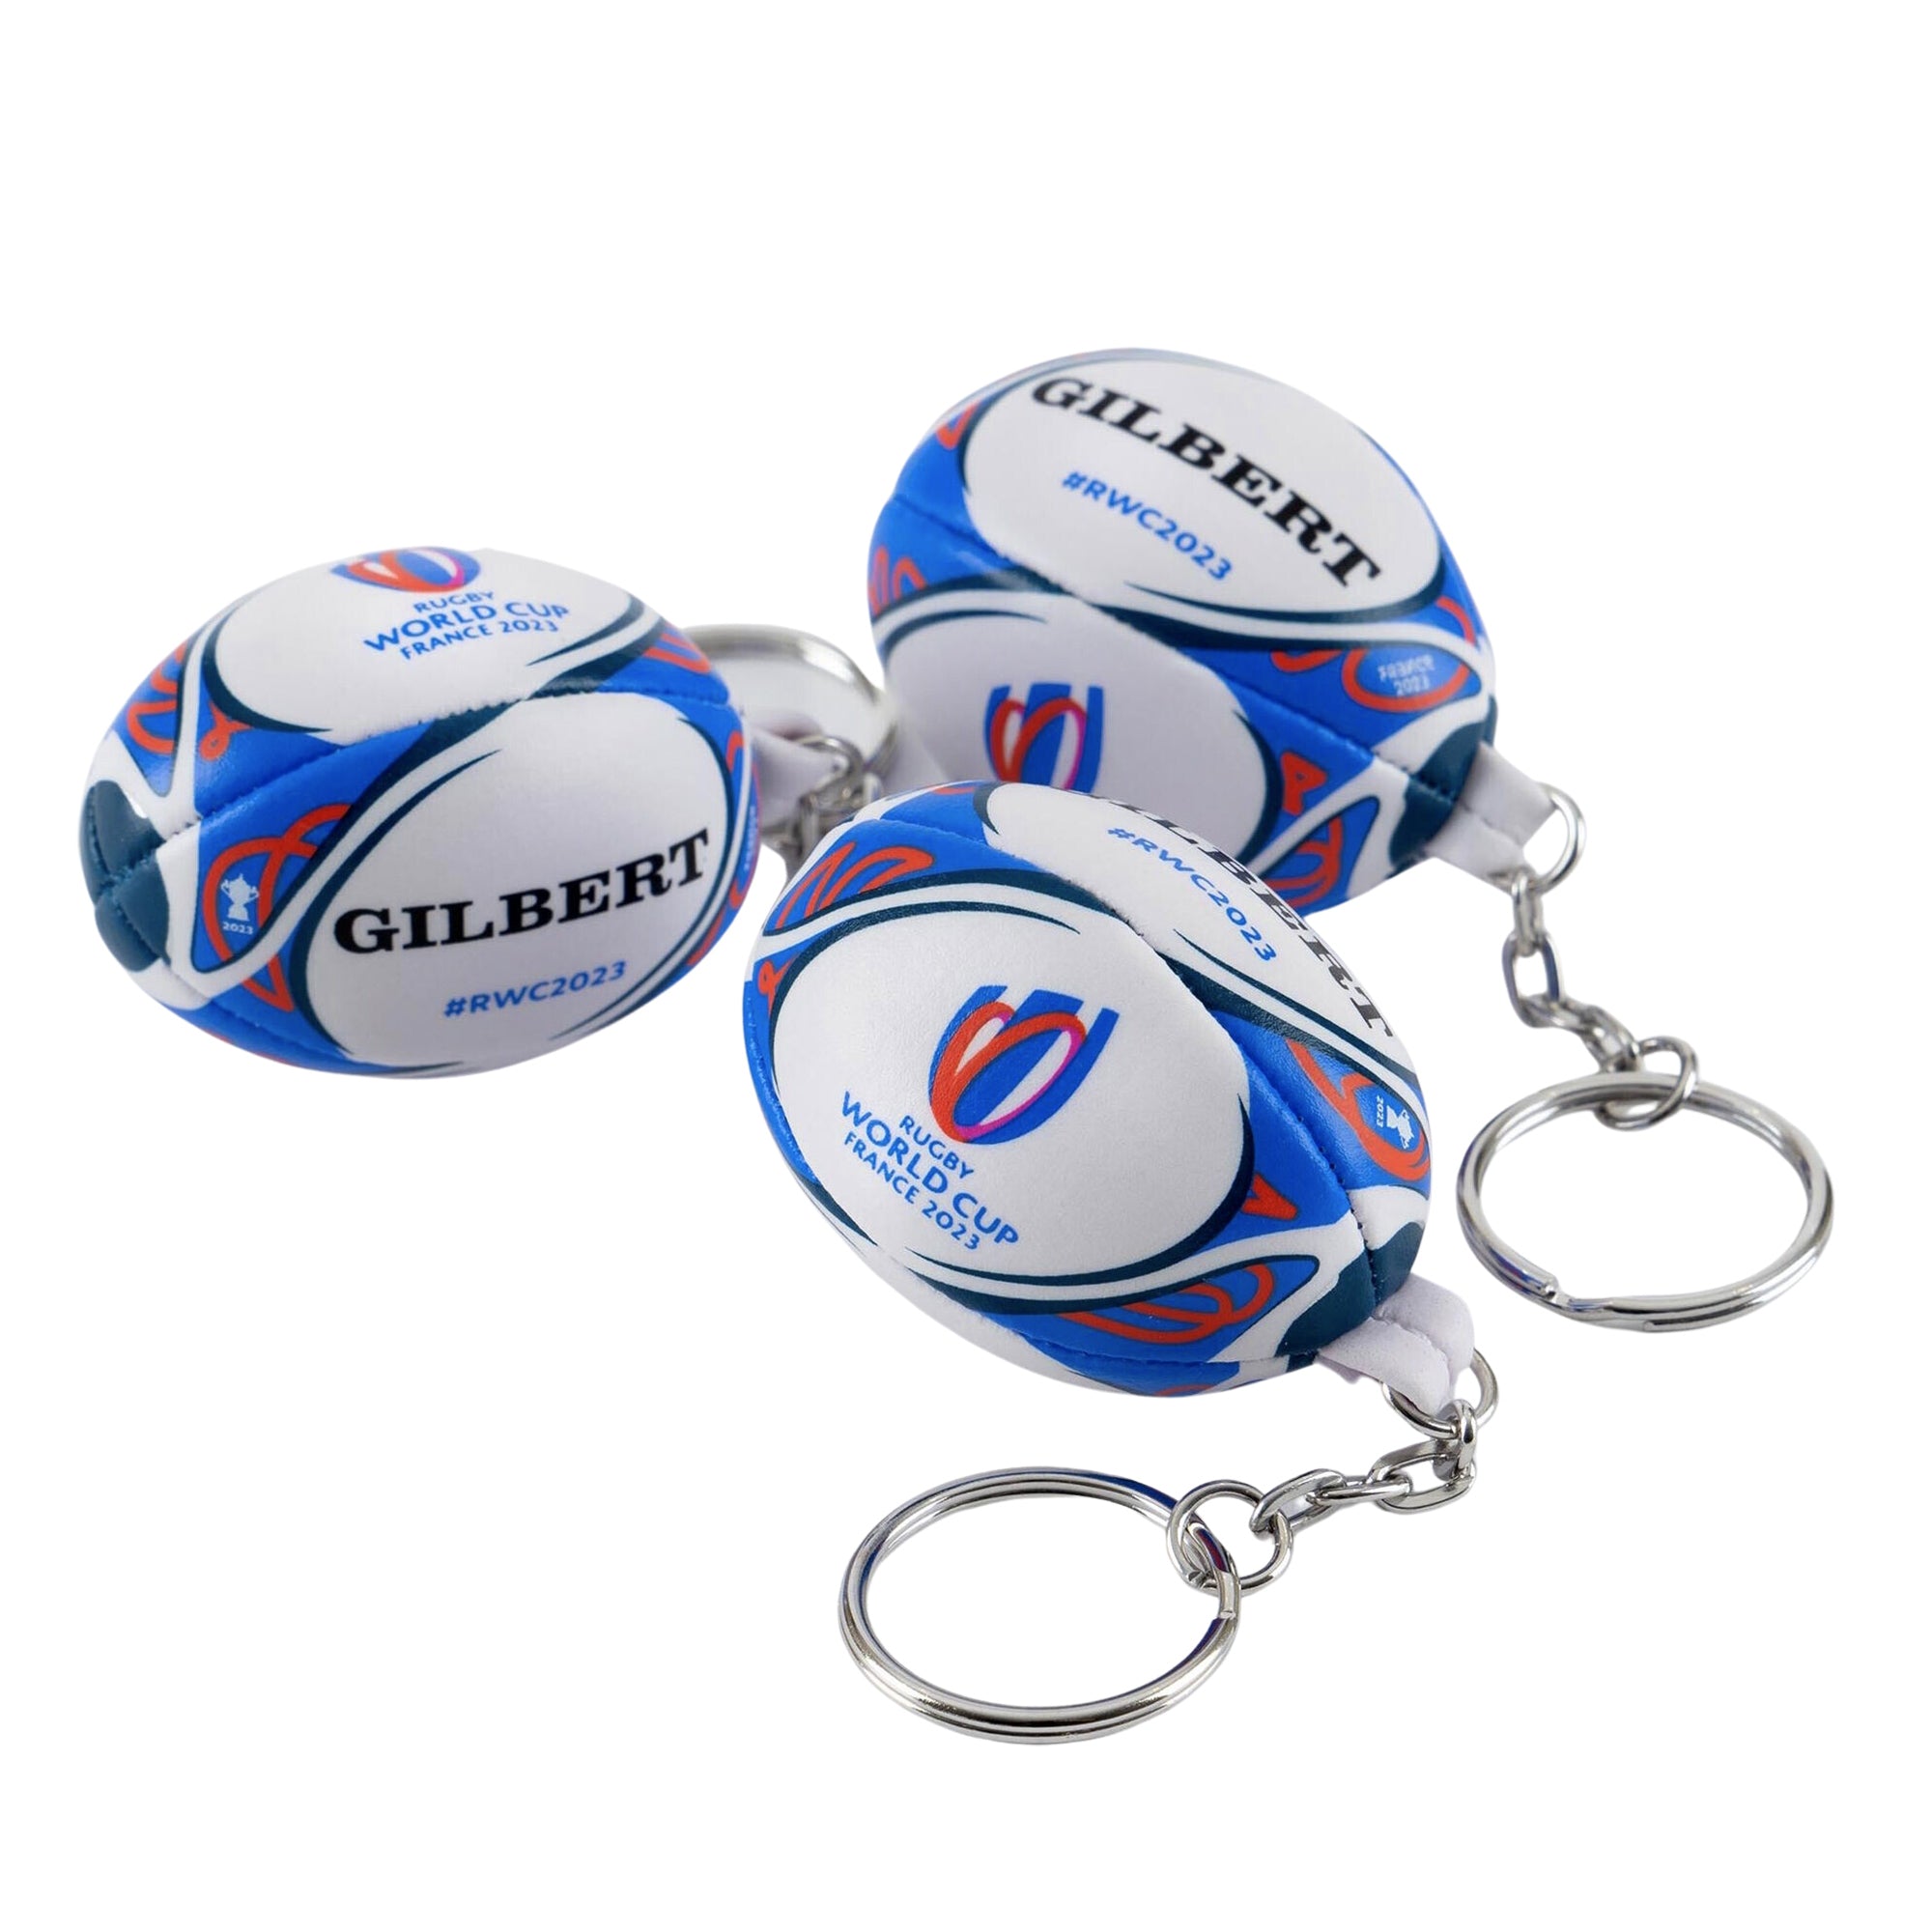 Rugby Imports Gilbert Rugby World Cup 2023 Keyring